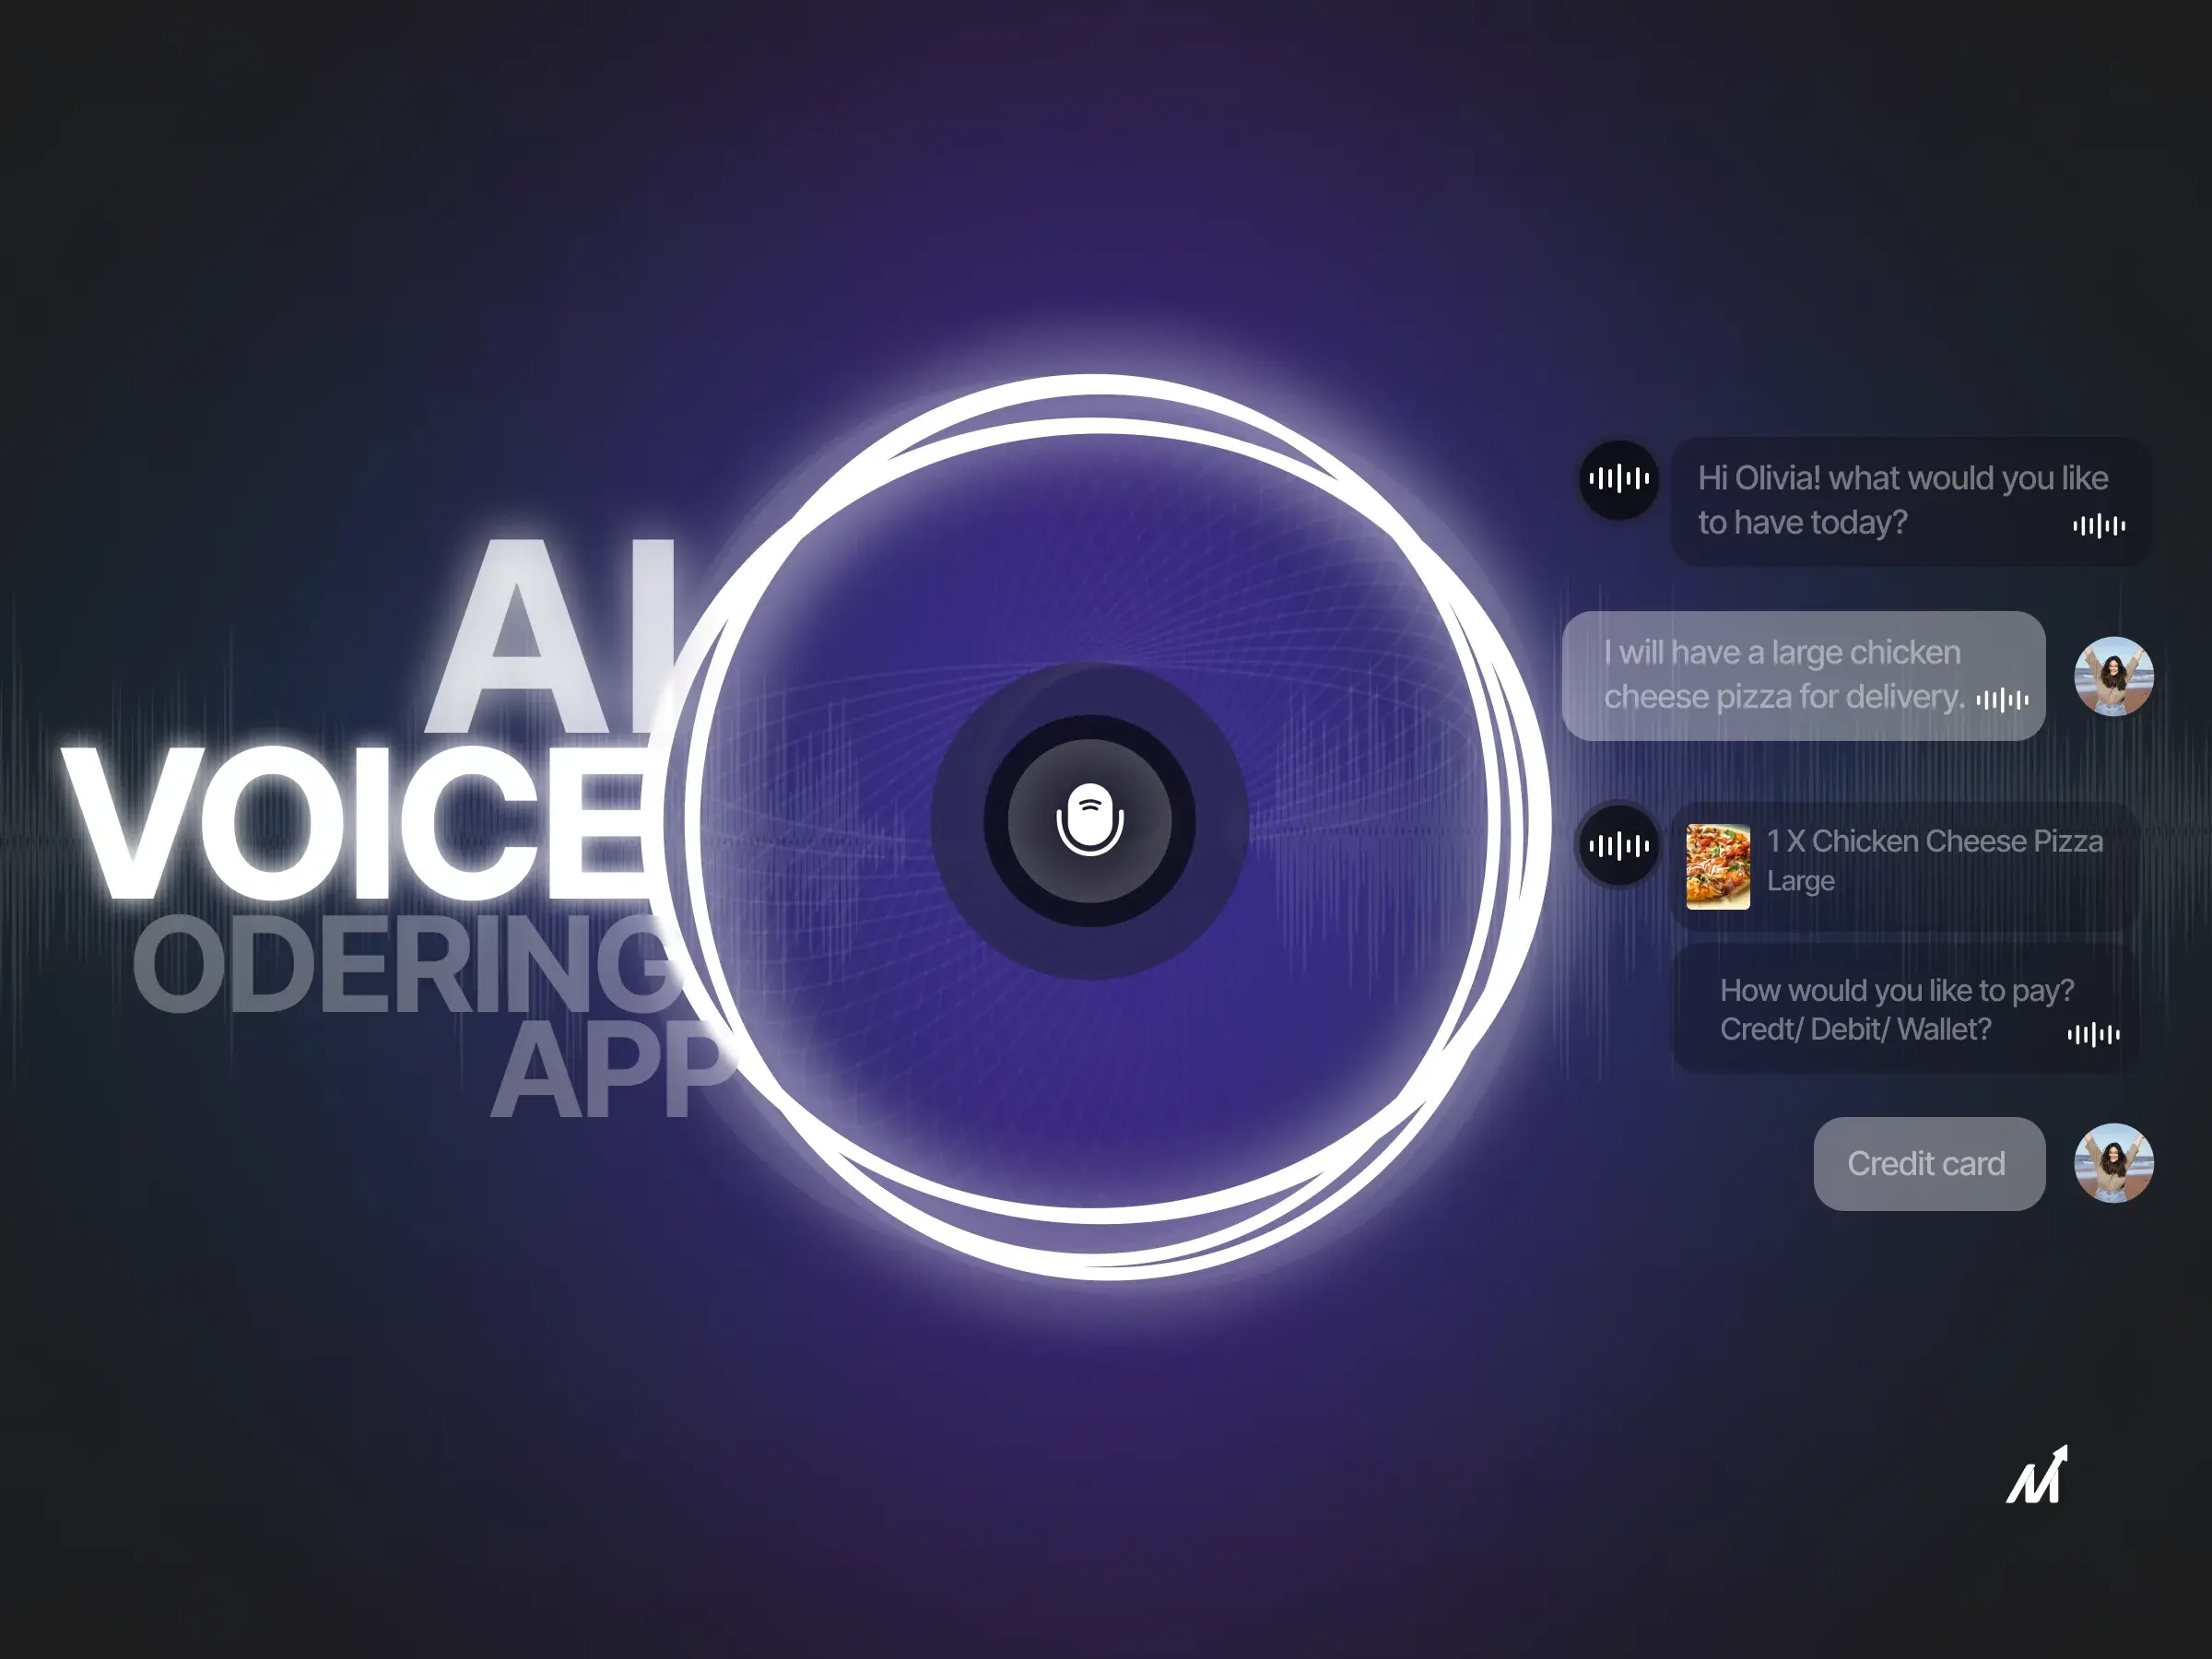 How to Build an AI Voice Ordering System? - Markovate